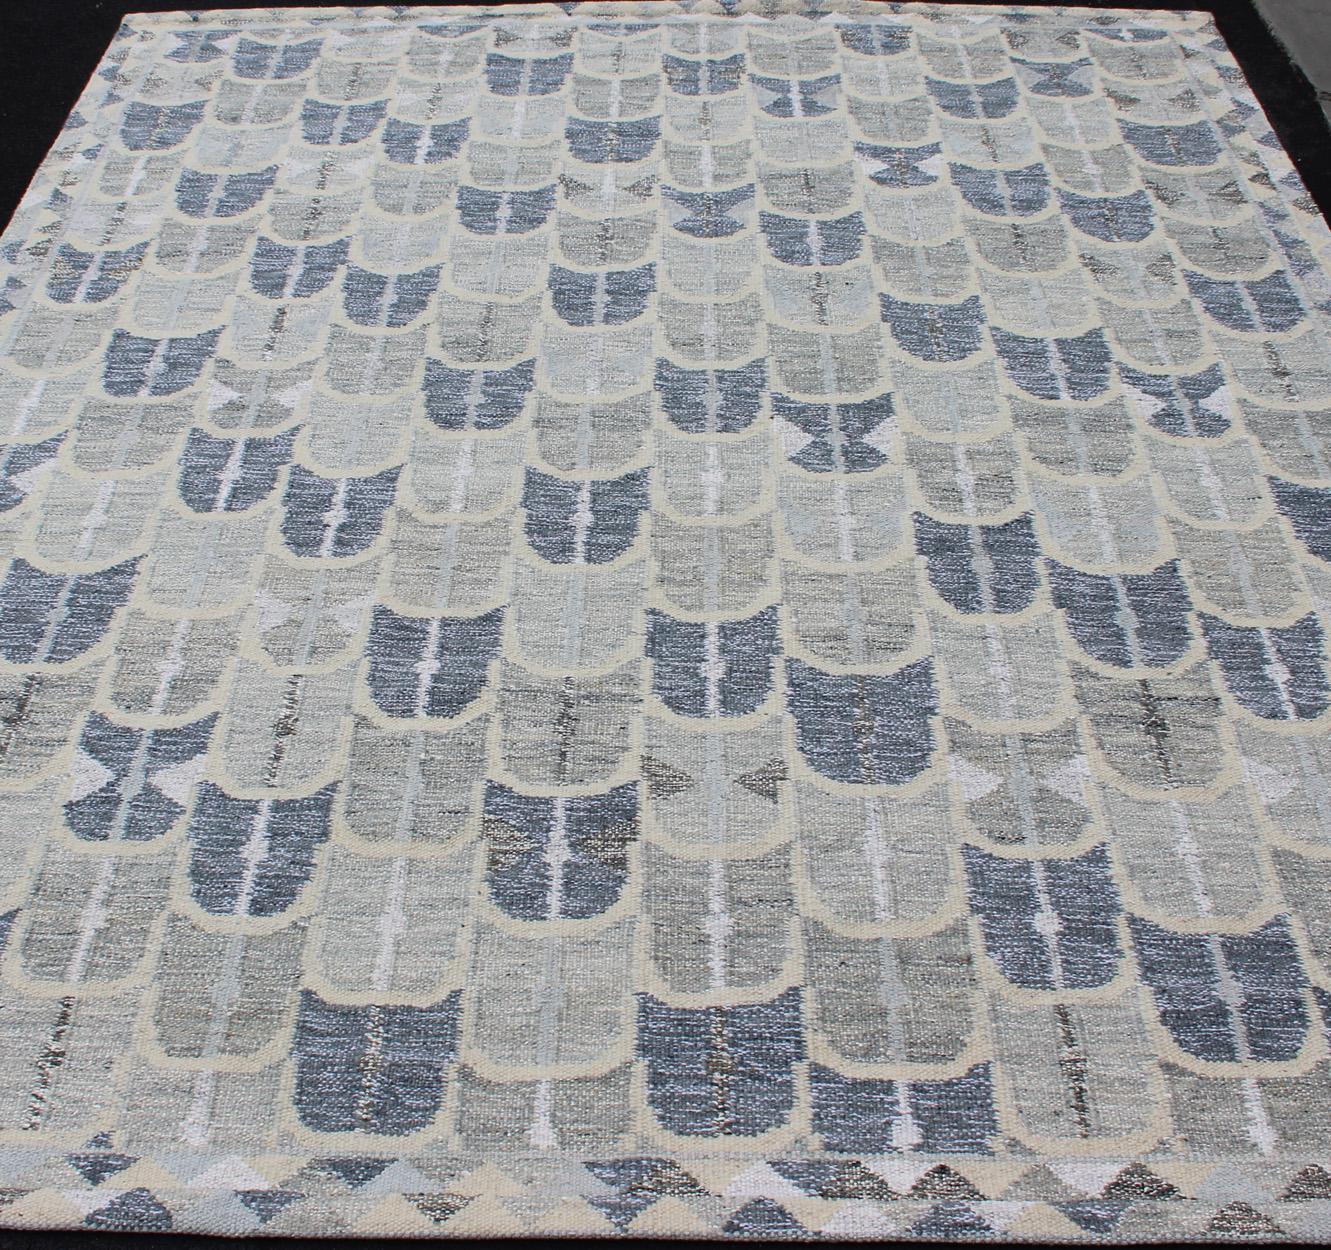 Wool Contemporary Scandinavian Design Flat-Weave Rug in Blue, Cream and Grays